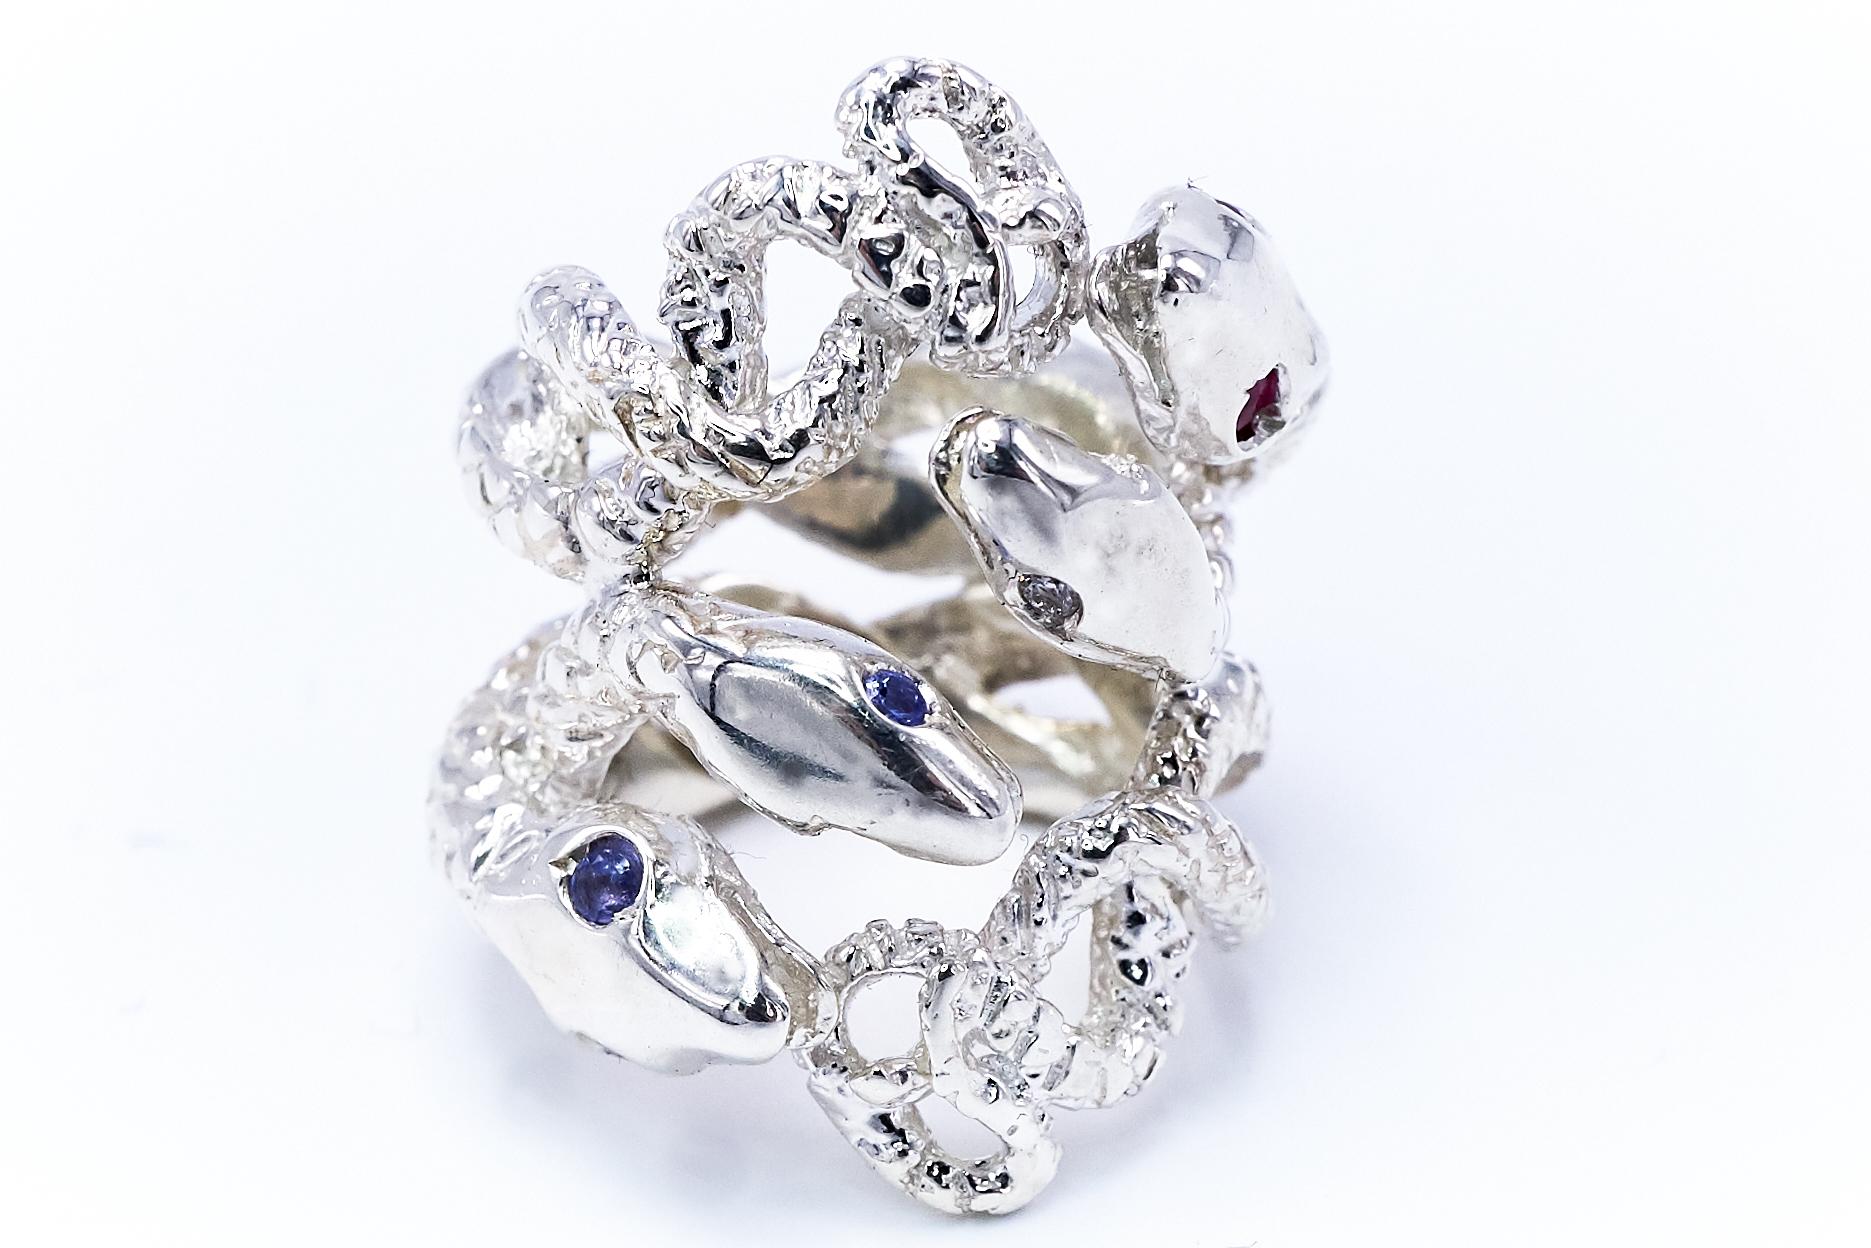 White Diamond Ruby Tanzanite Snake Silver Ring Cocktail Statement J Dauphin For Sale 2